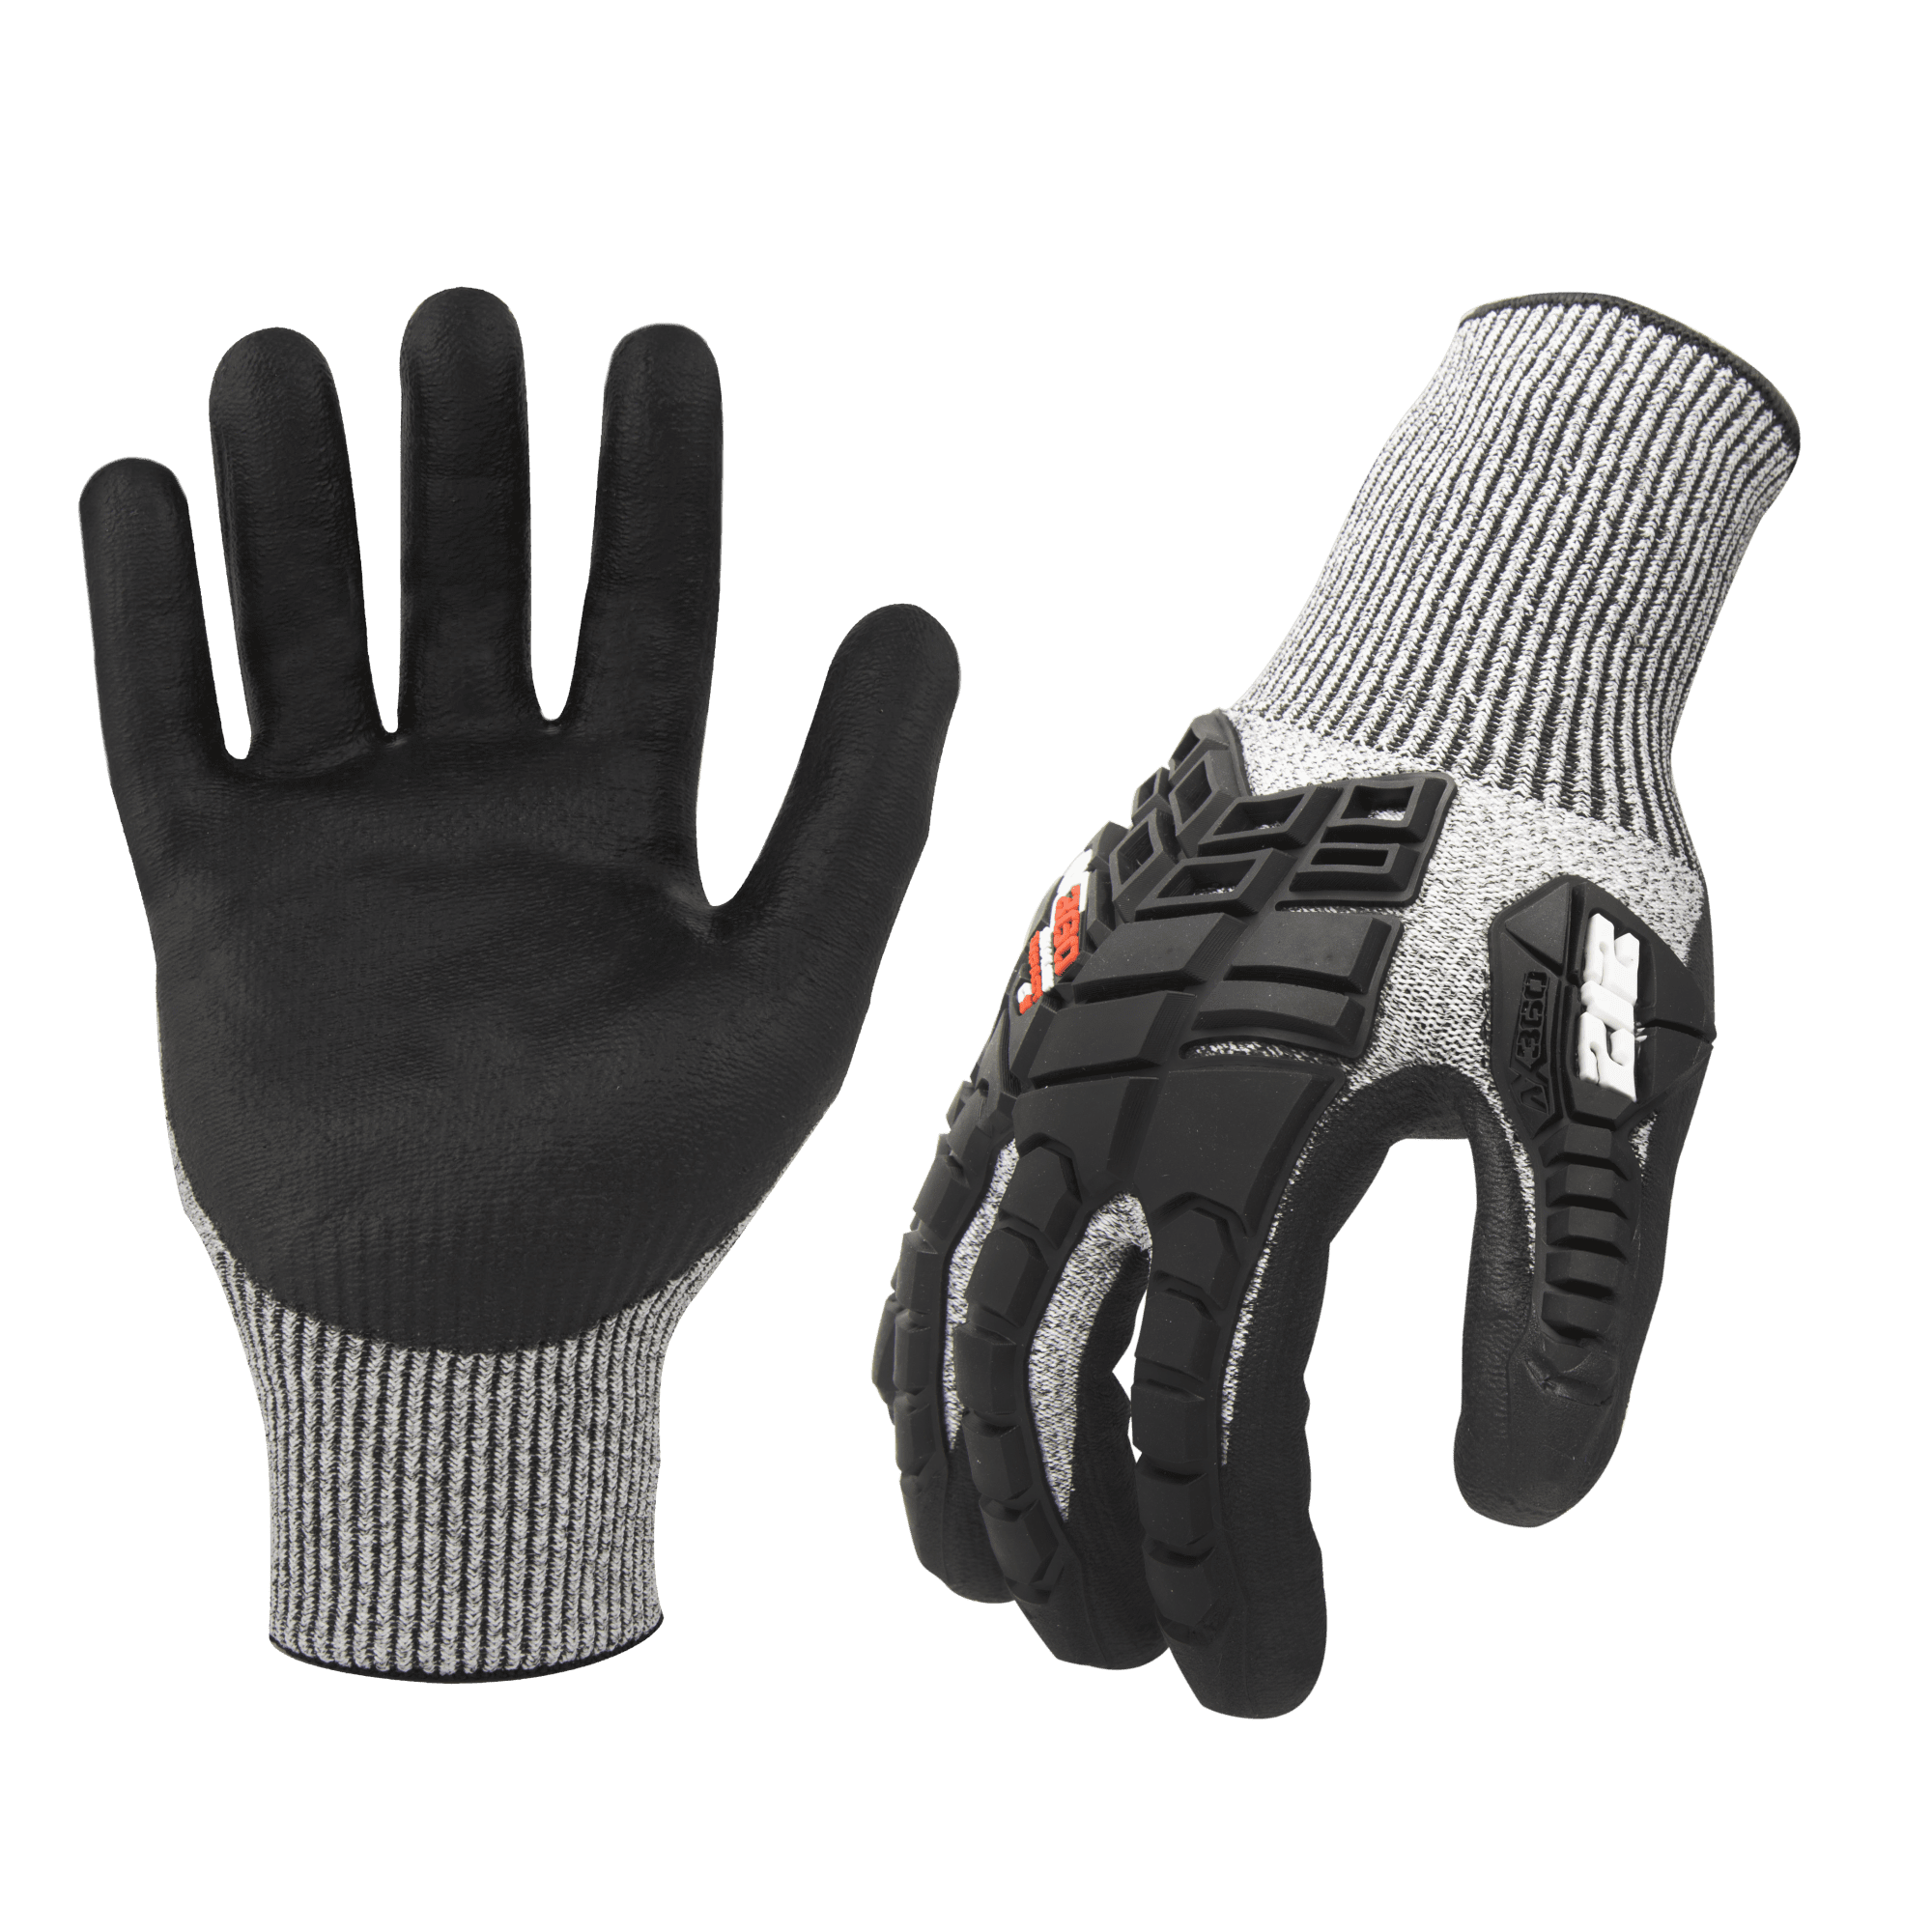 212 Performance Gloves AXDG-16-008 AX360 Dotted Grip Nitrile-Dipped Work Glove, 12-Pair Bulk Pack, Small